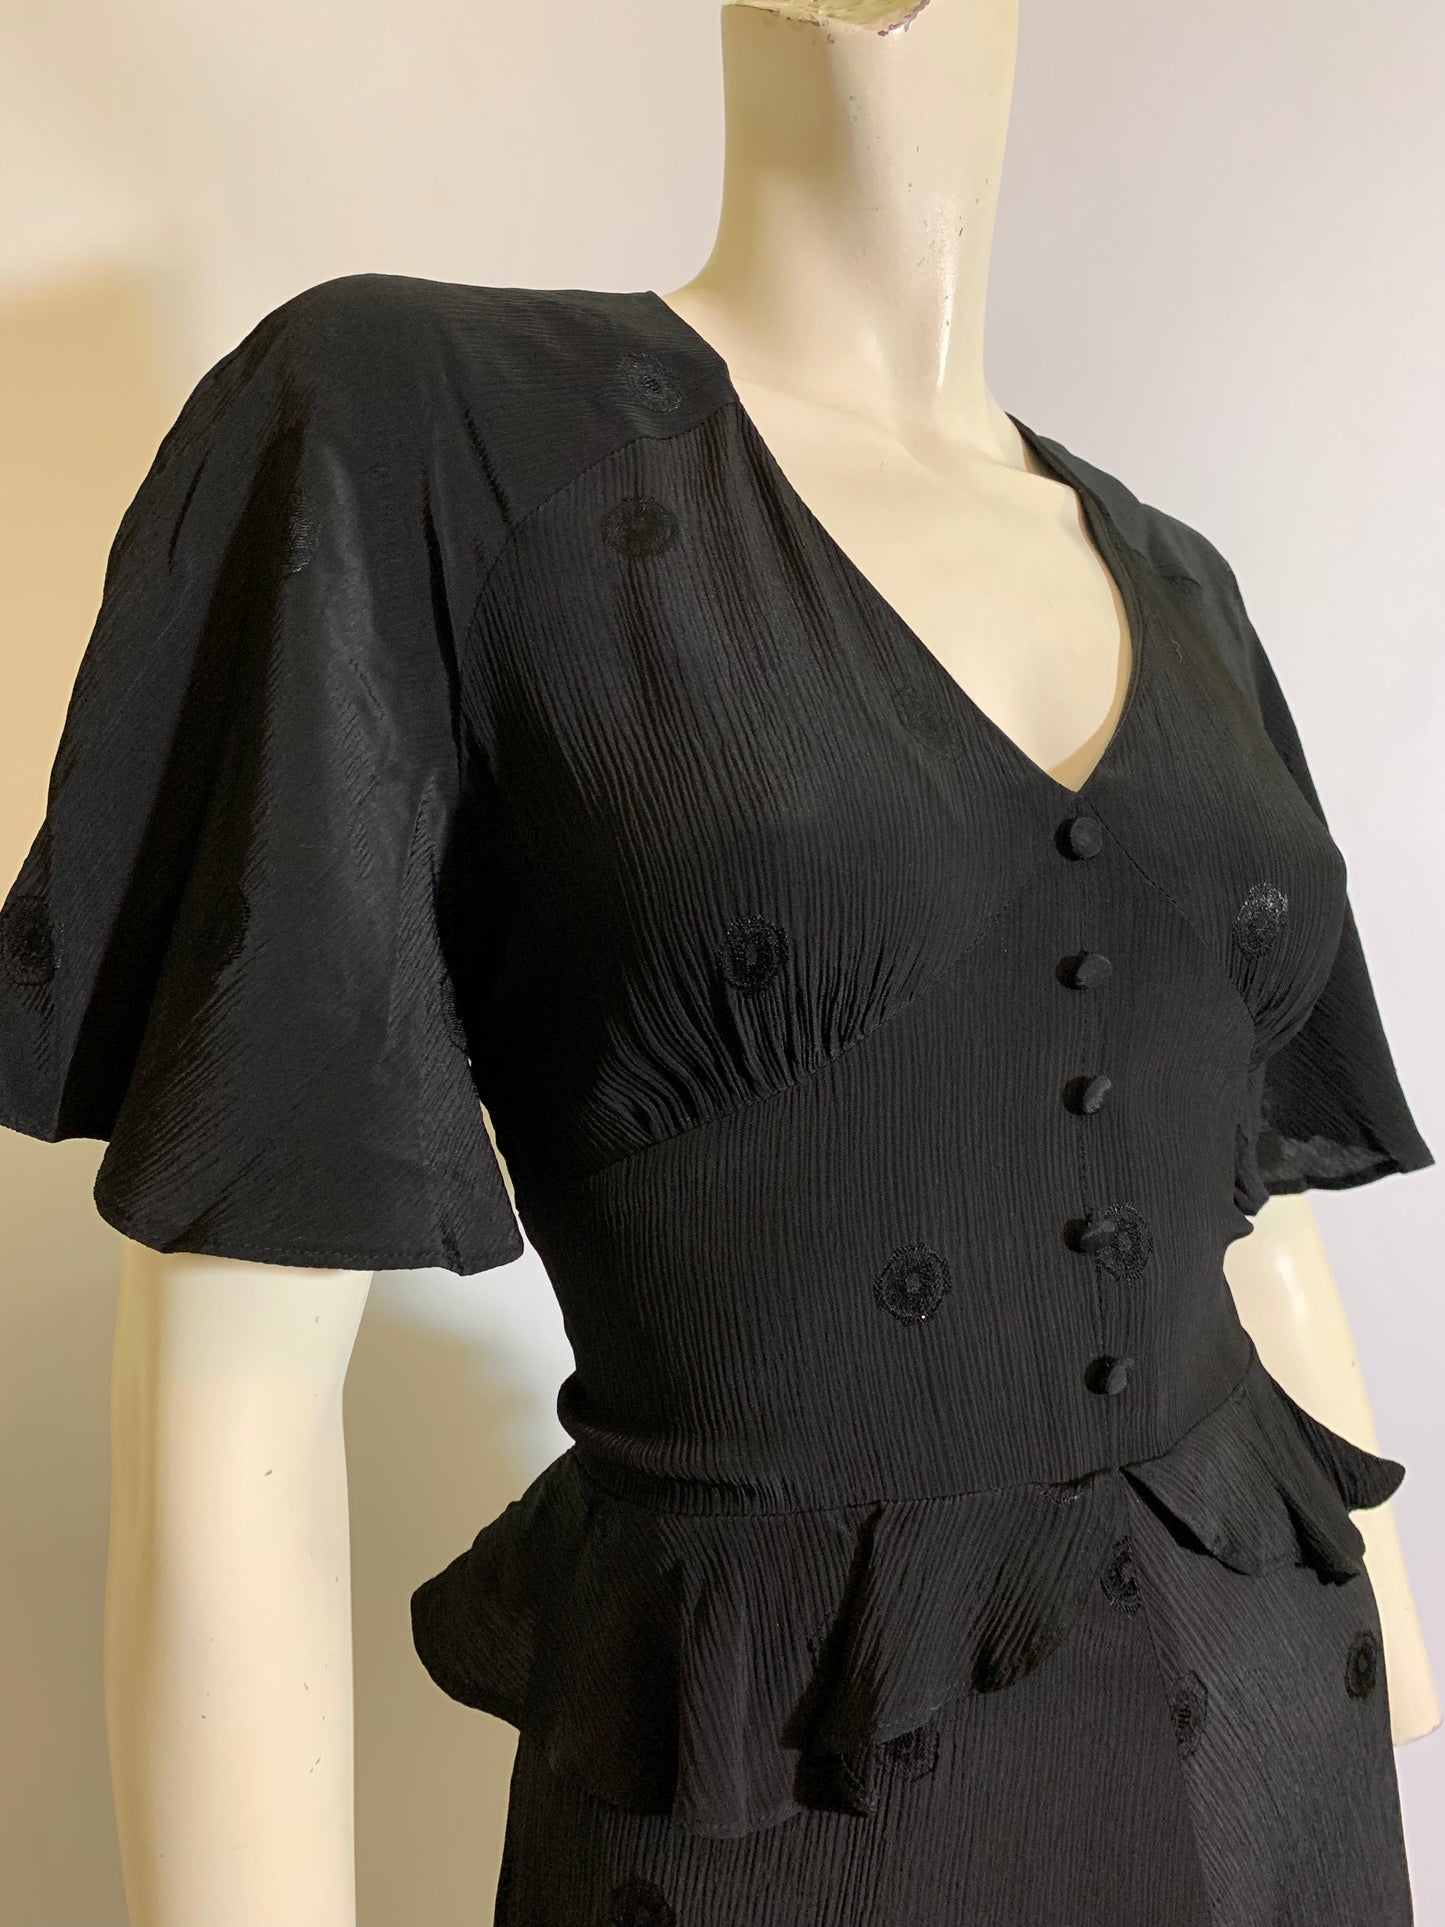 1930s Style Black Crepe Rayon Dress with Flutter Sleeves circa 1970s